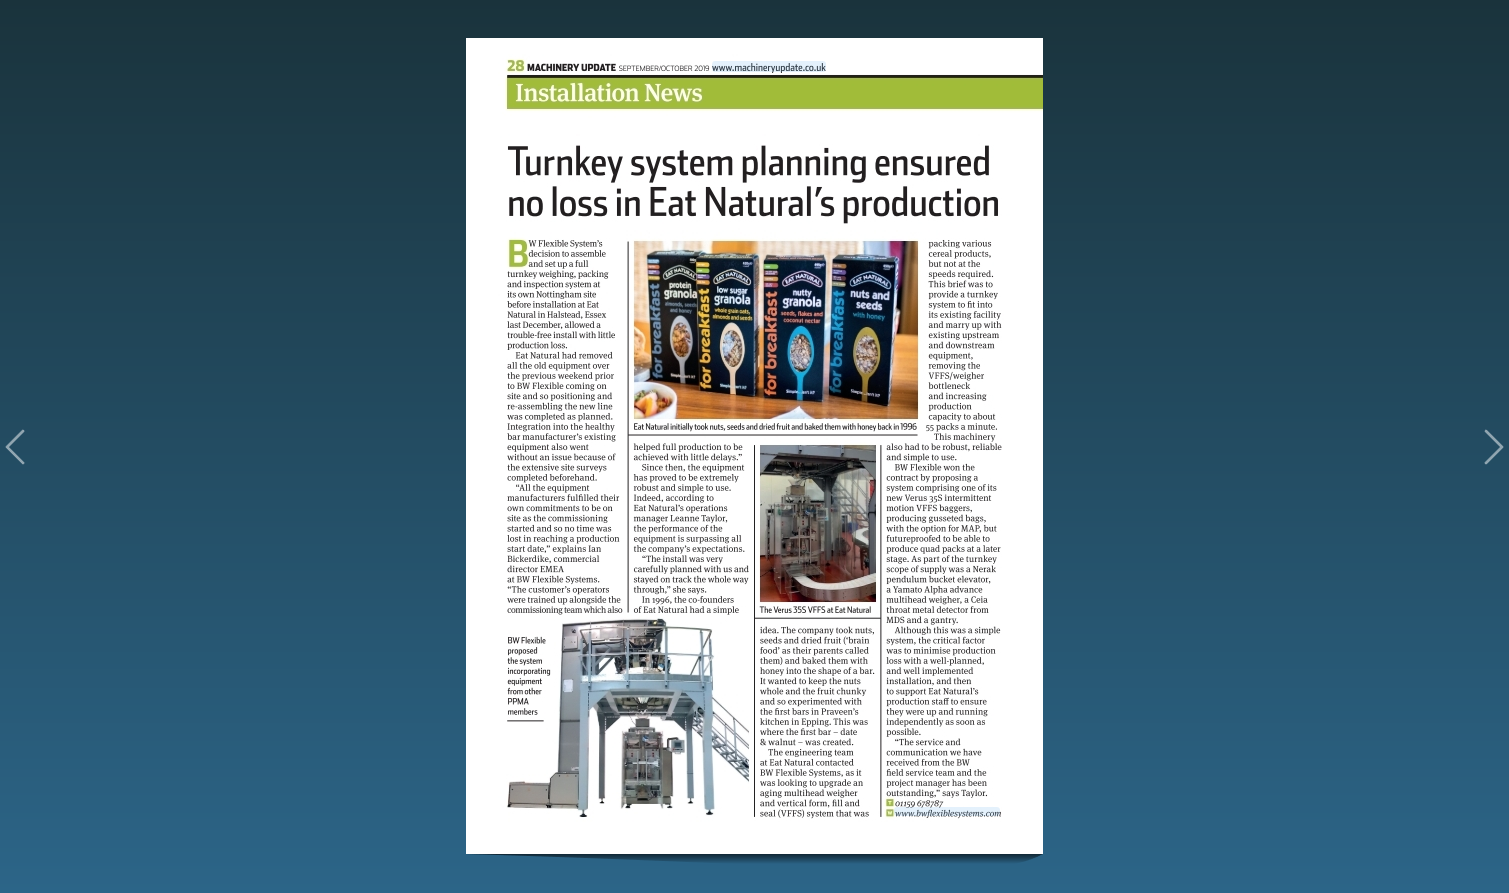 "Turnkey system planning ensured no loss in Eat Natural